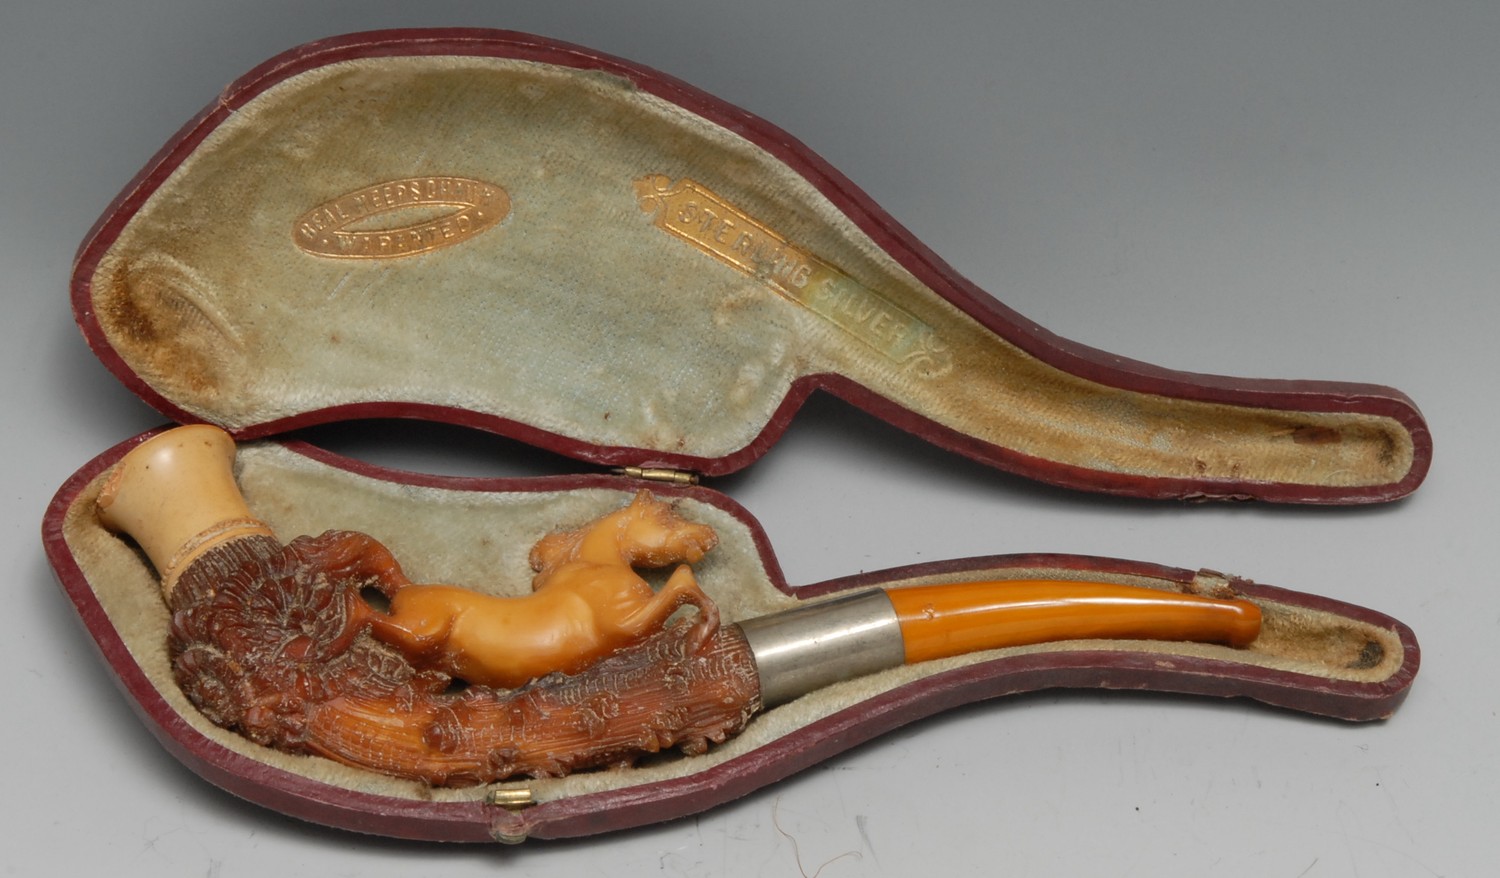 A late 19th century Meerschaum pipe, carved with a horse, amber mouthpiece, 17.5cm long, cased, c.